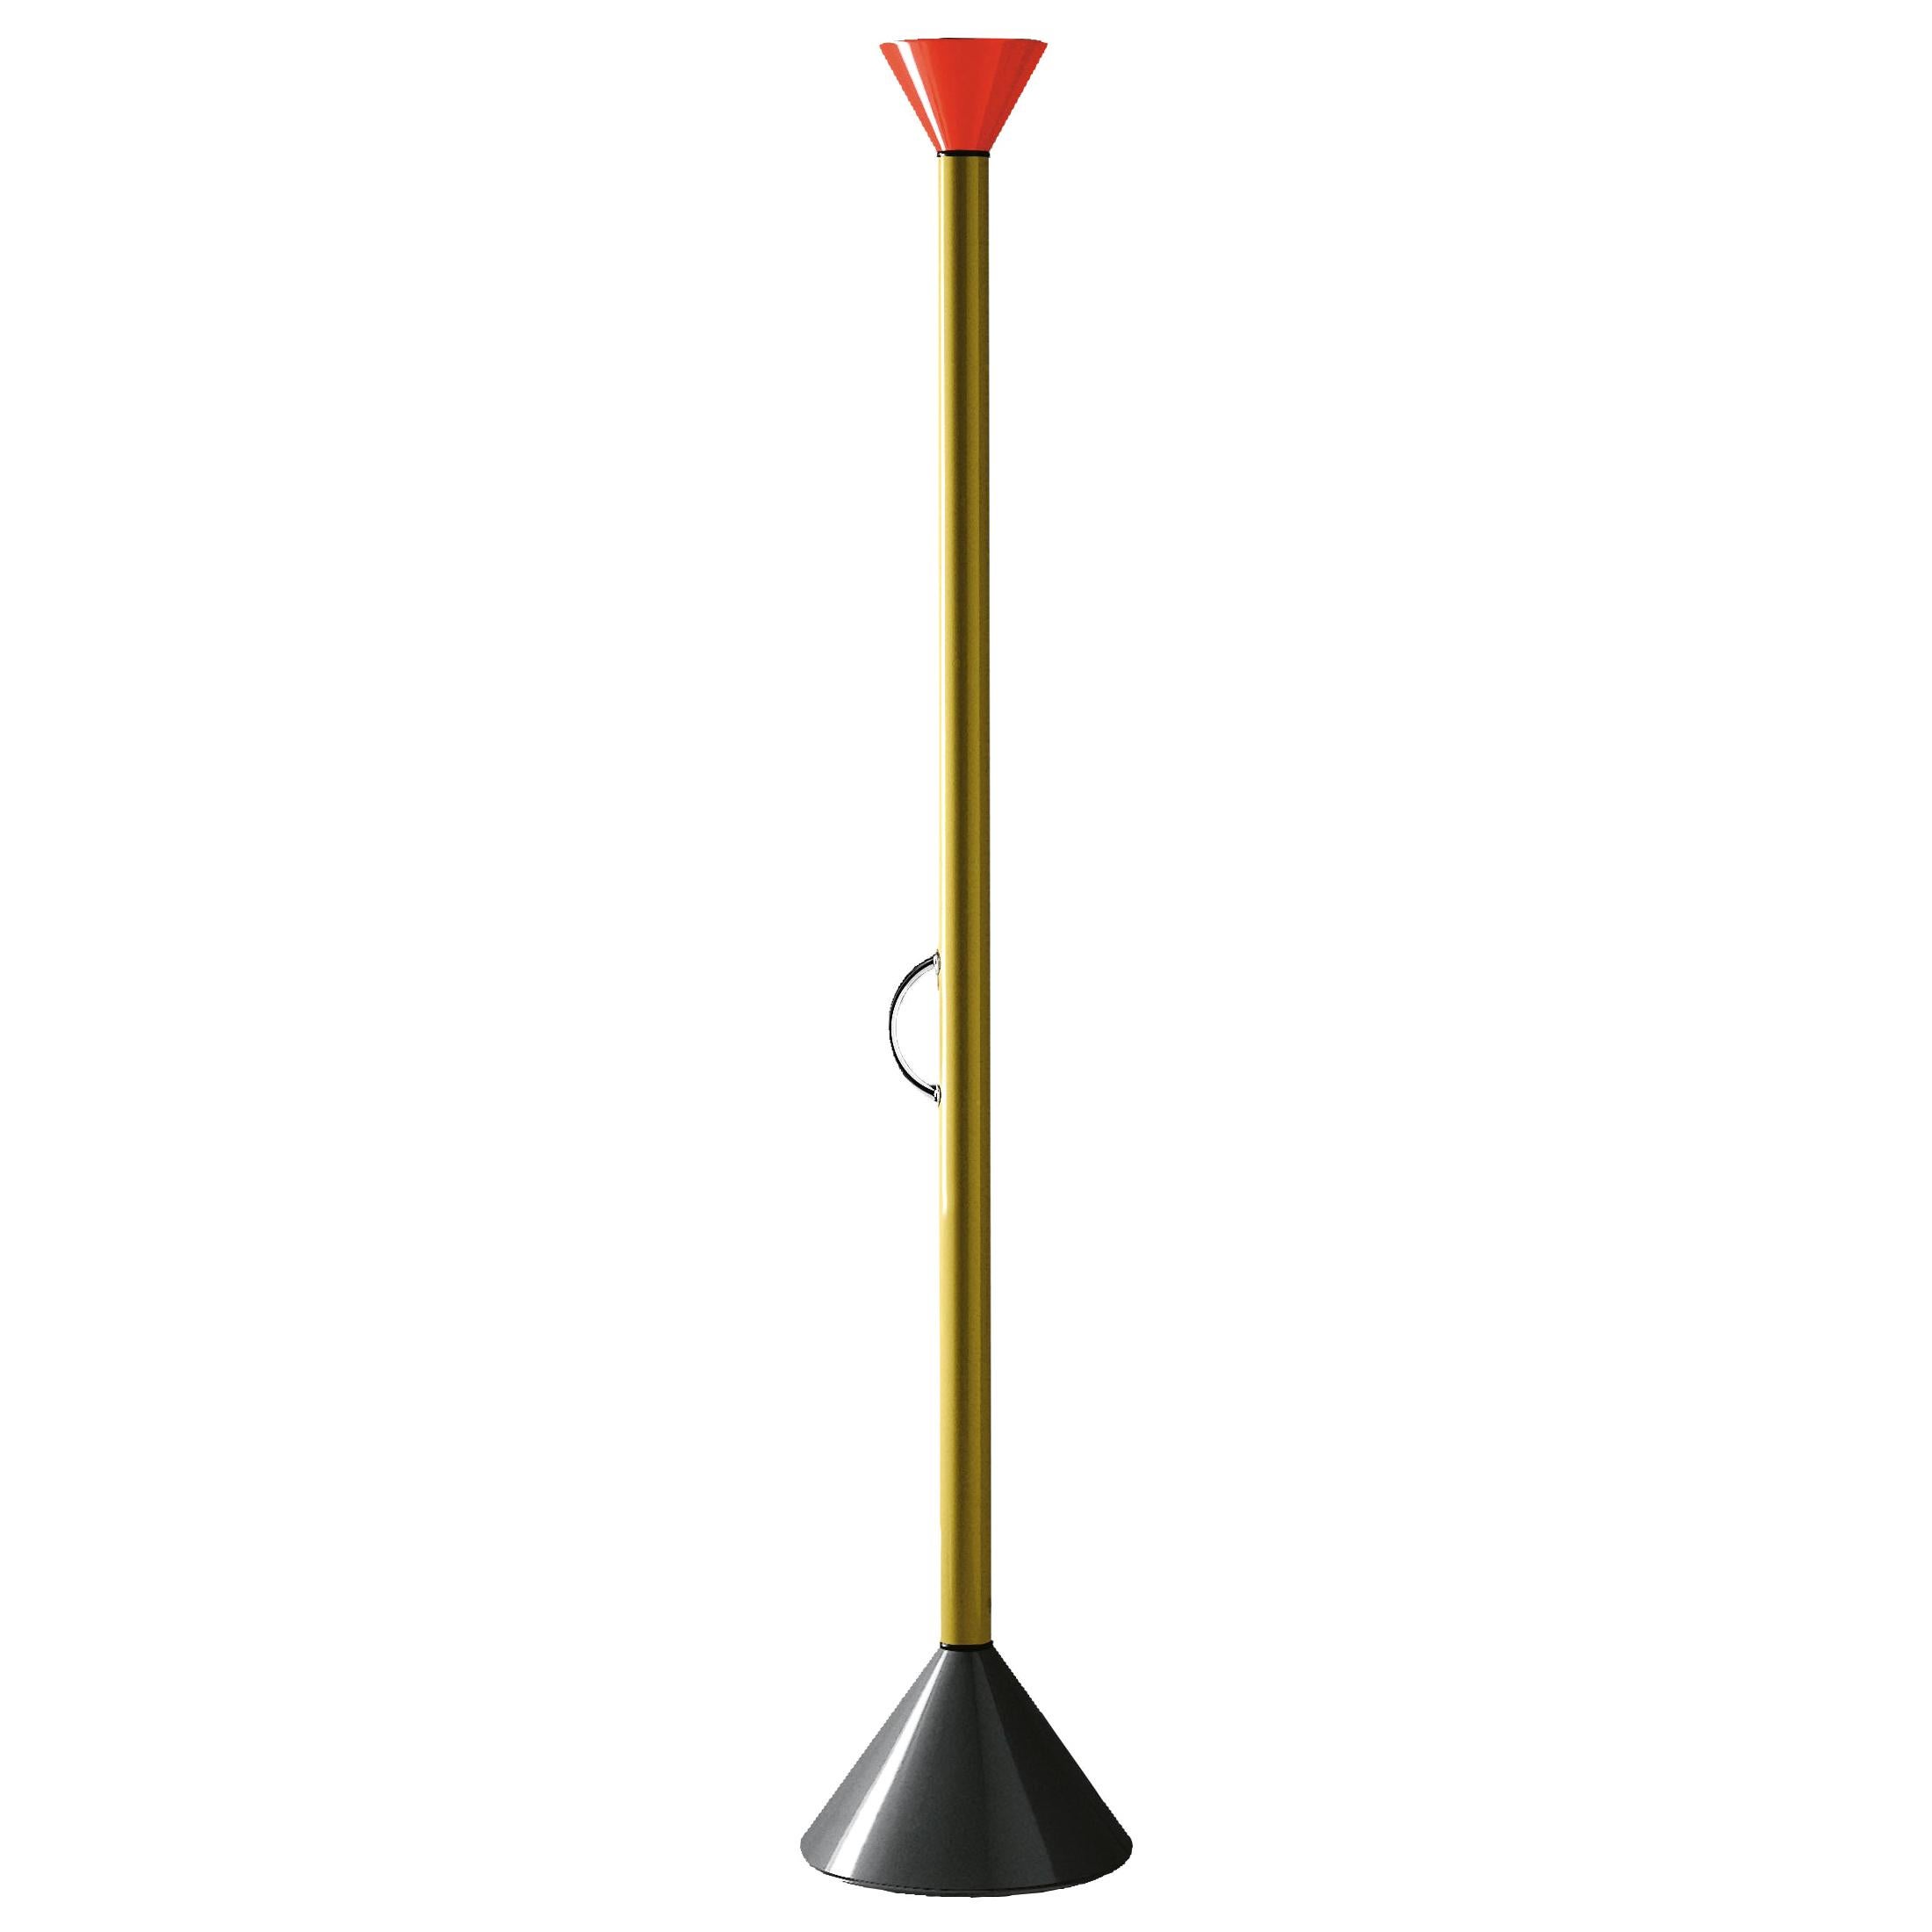 Artemide Callimaco LED Floor Lamp in Multi-Color by Ettore Sottsass